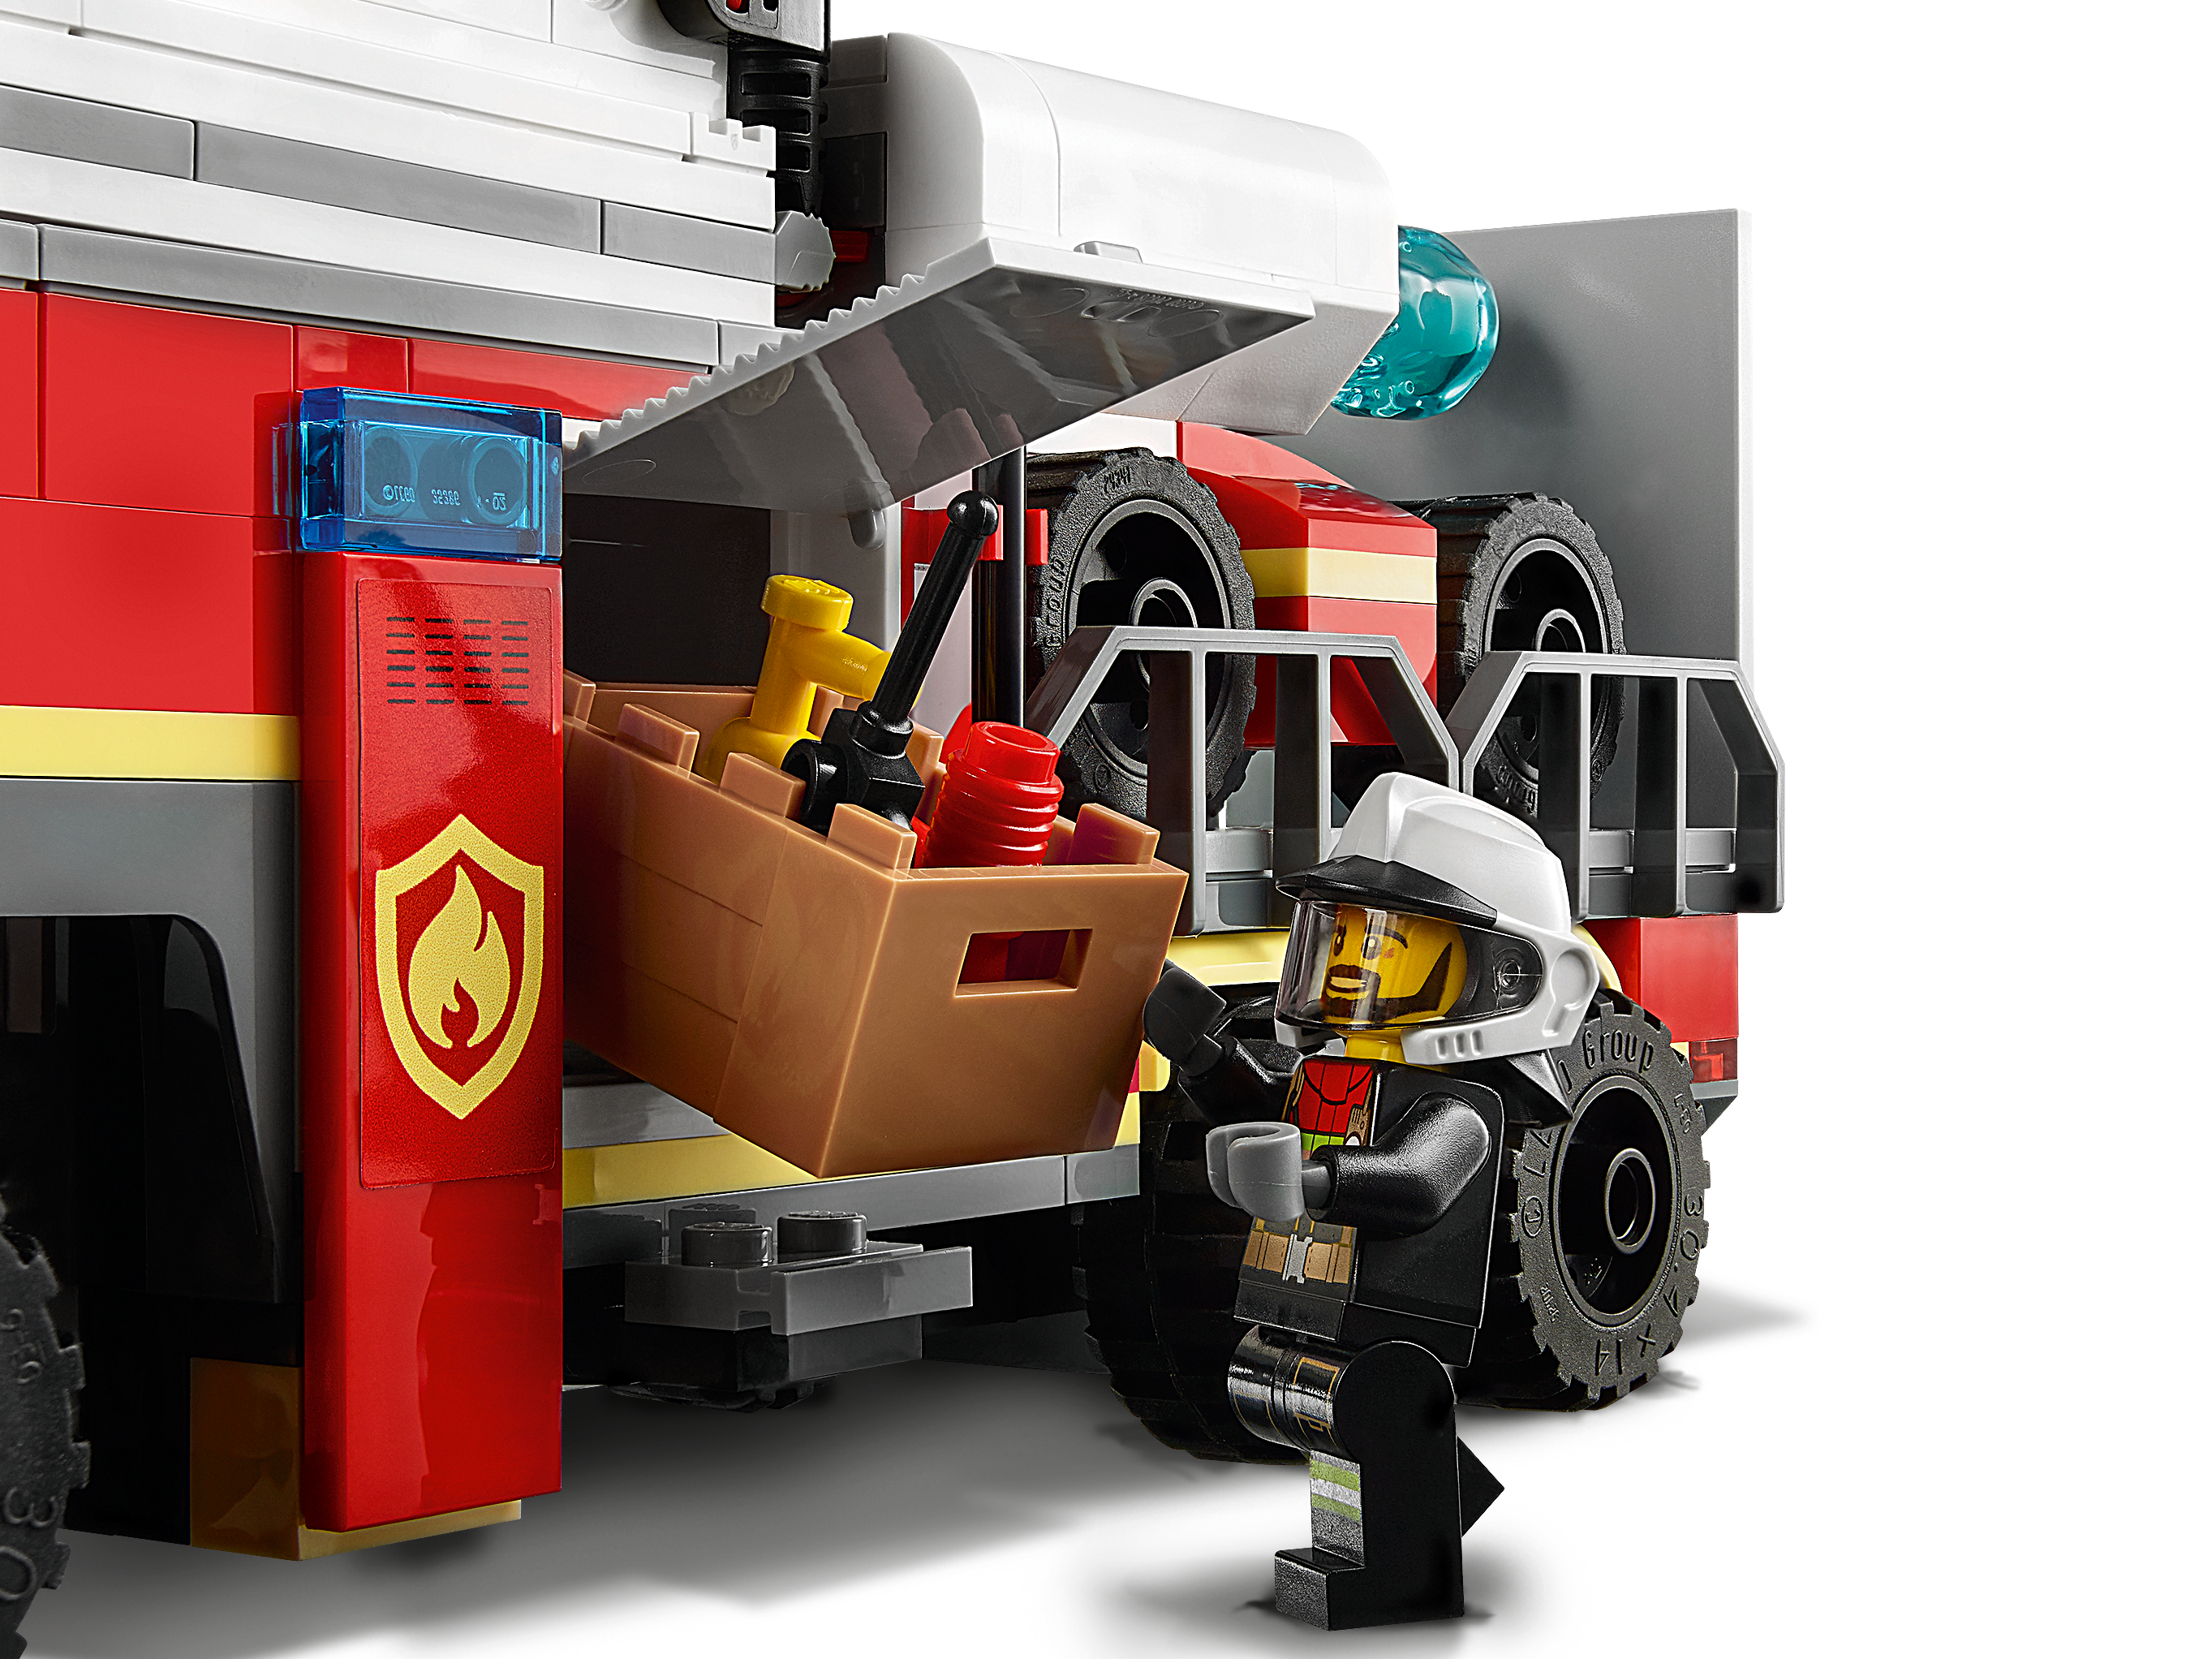 380 Pieces New 2021 LEGO City Fire Command Unit 60282 Building Kit; Fun Firefighter Toy Building Set for Kids